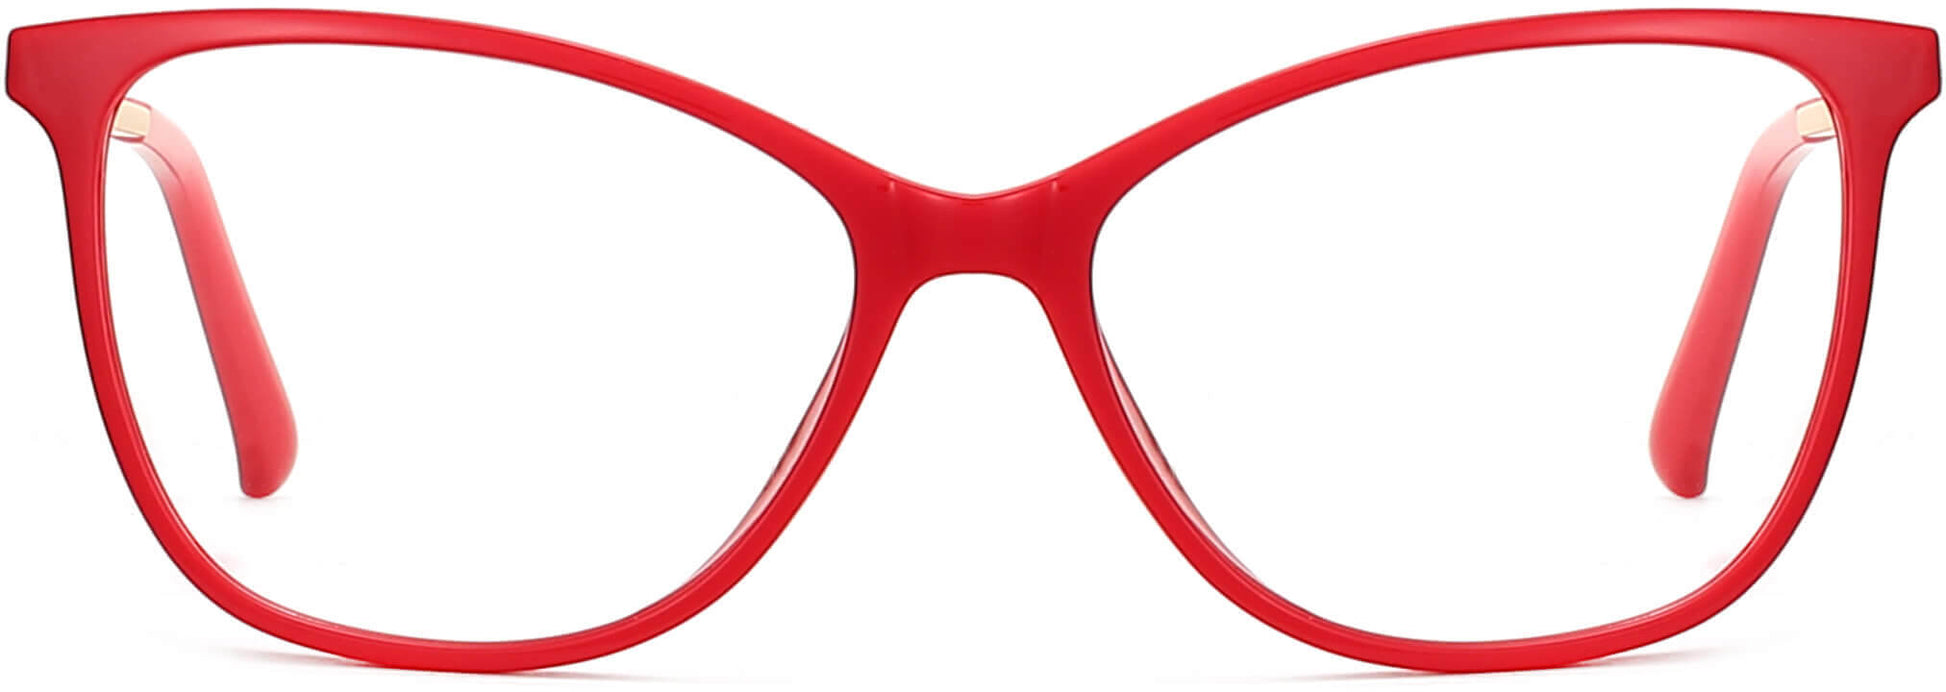 Roella Cateye Red Eyeglasses from ANRRI, front view